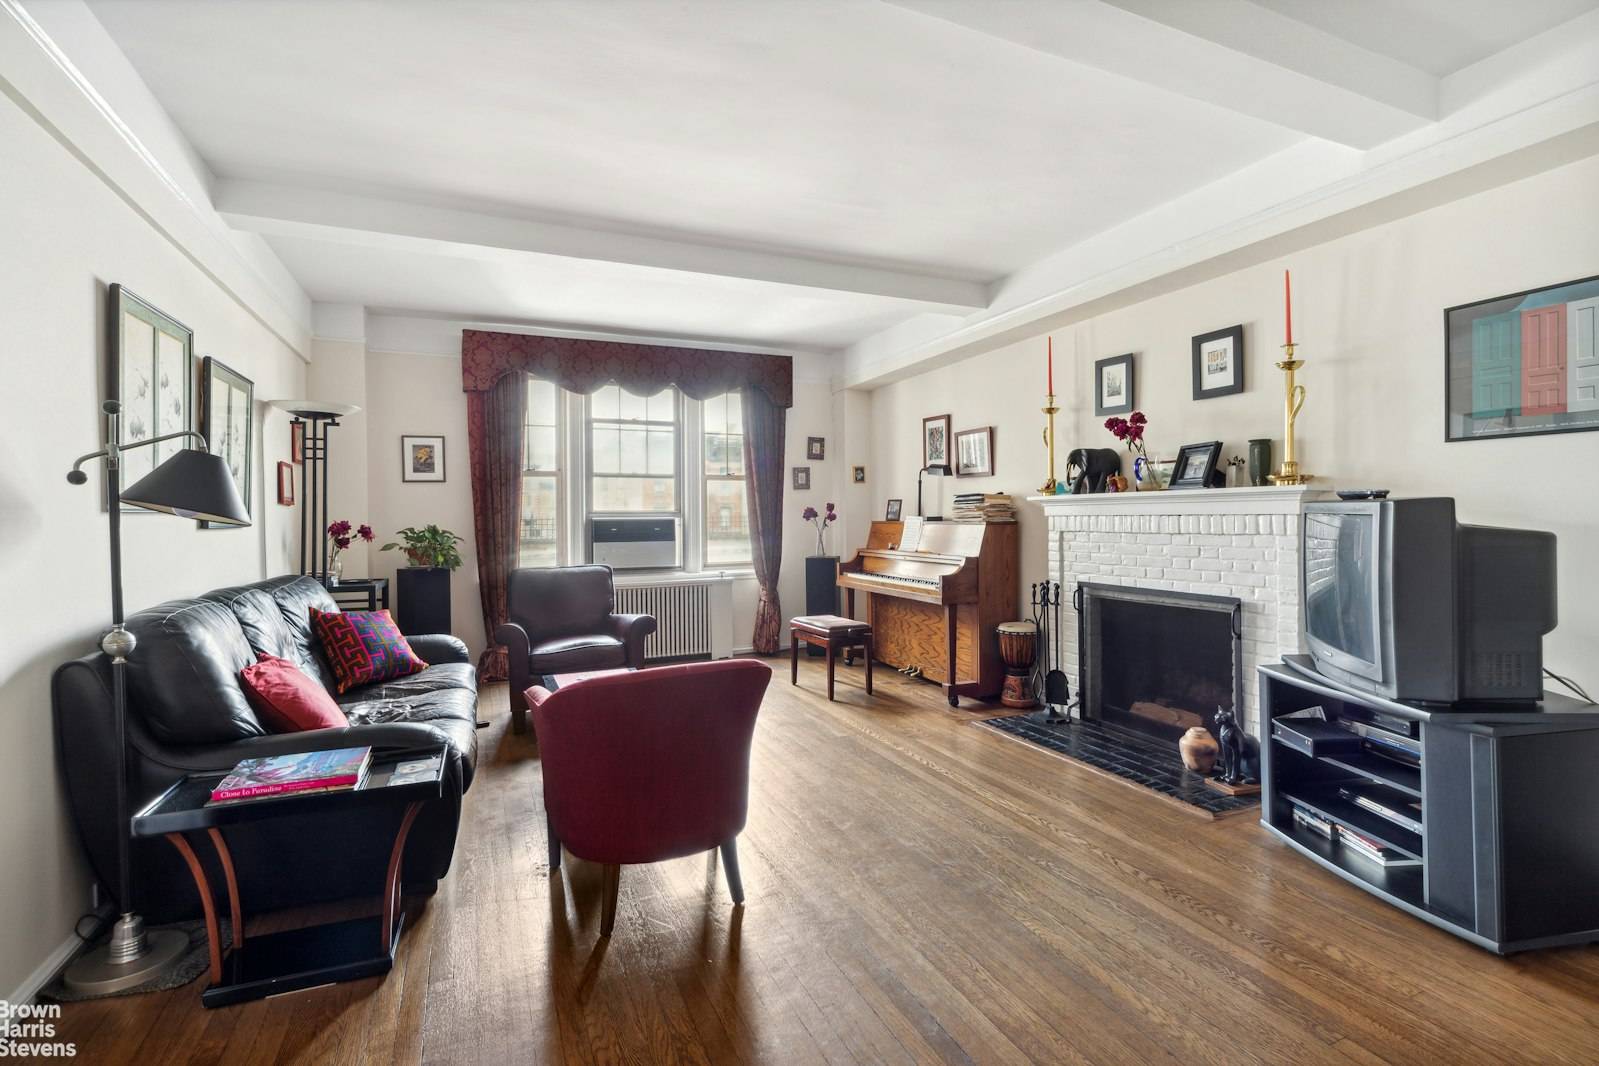 Located in one of only 4 prewar doorman condo buildings in Greenwich Village built by renowned architects Bing amp ; Bing, unit 5A exudes elegance amp ; charm in the ...